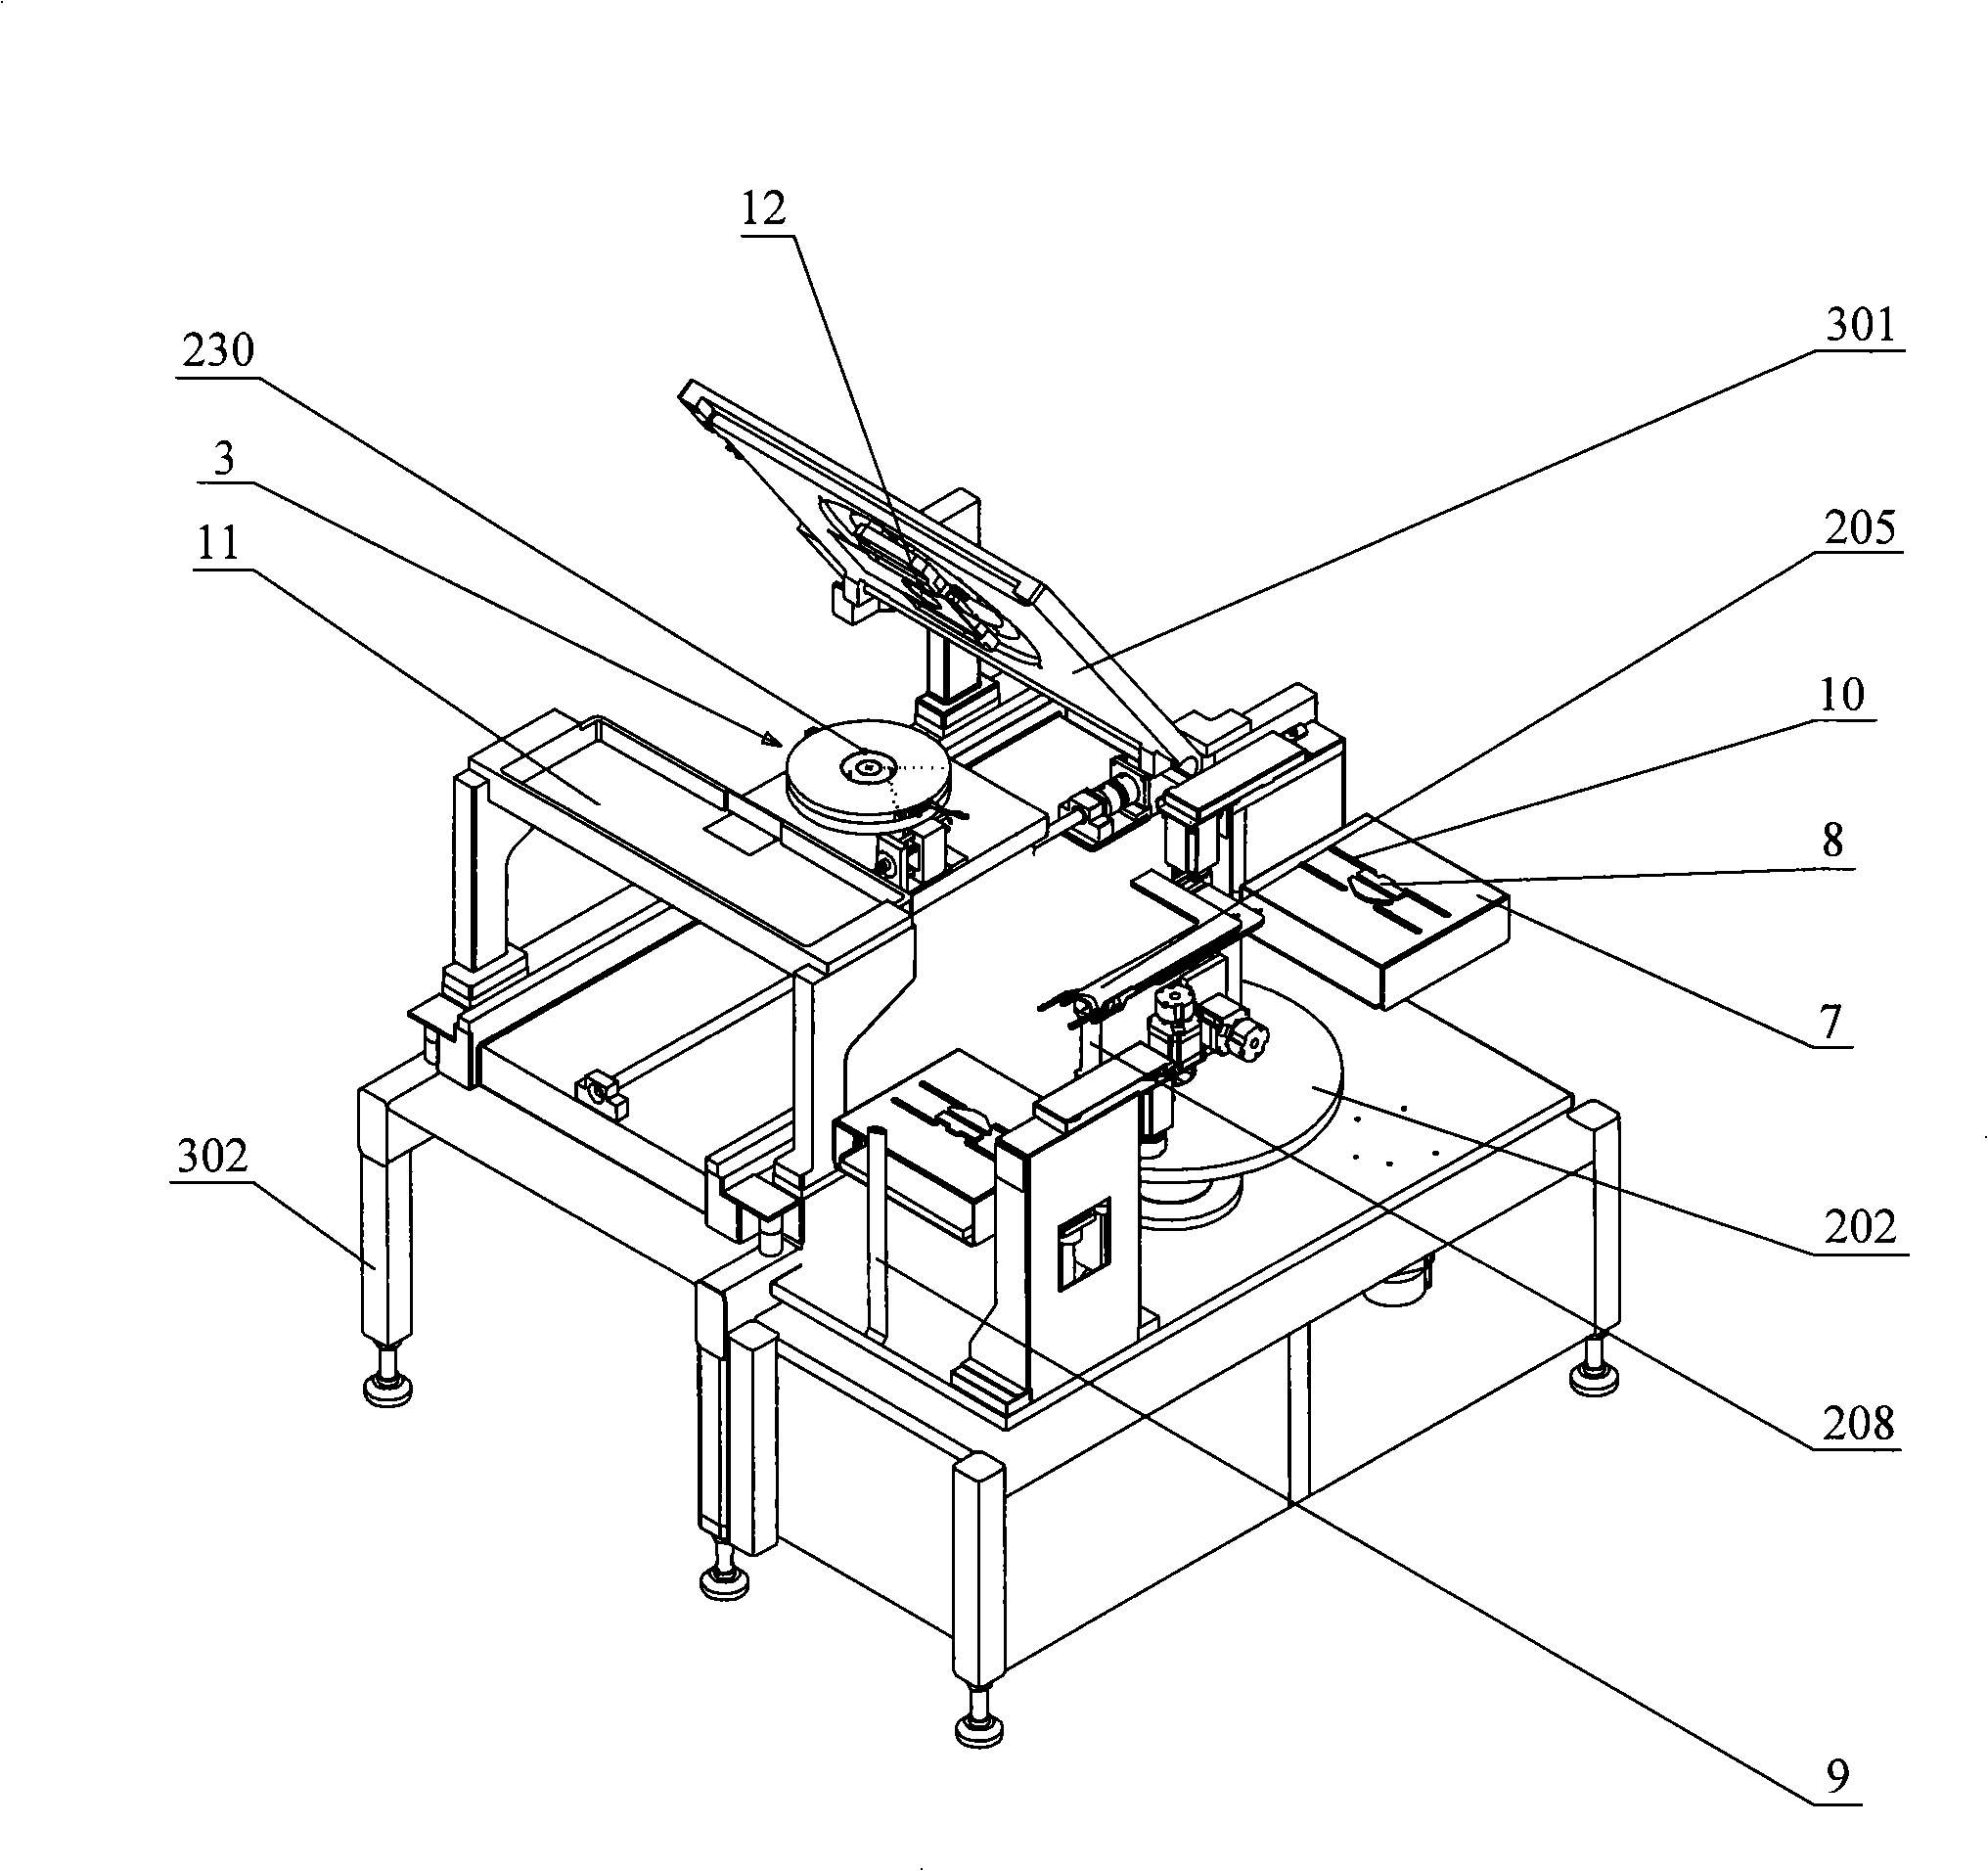 Full-automatic wafer test method and equipment accomplishing the method